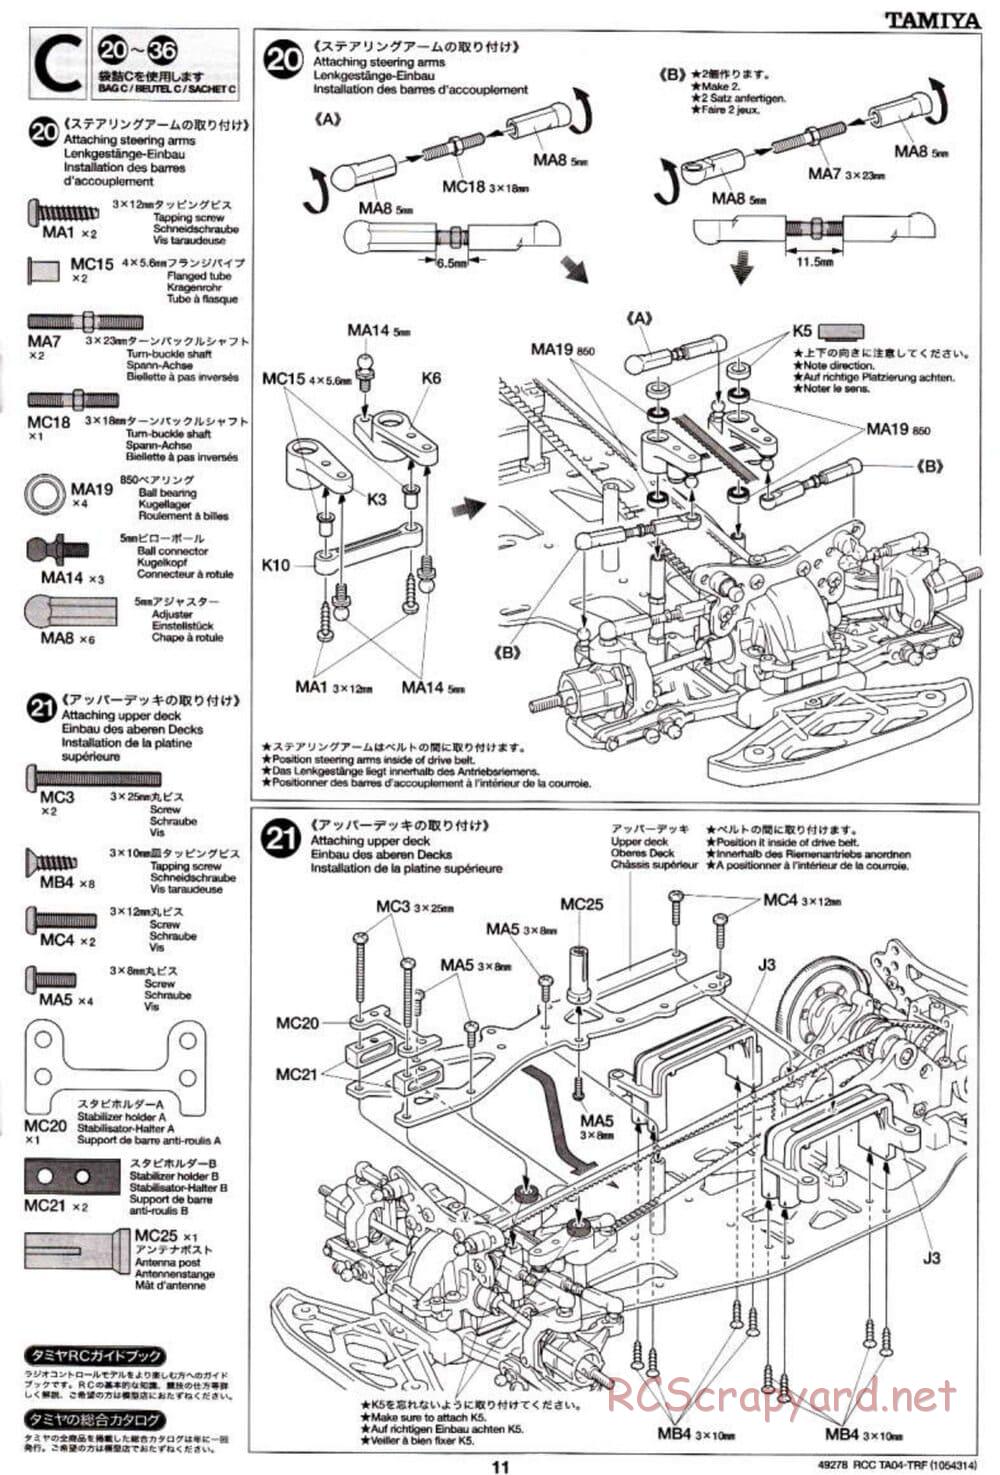 Tamiya - TA-04 TRF Special Chassis Chassis - Manual - Page 11